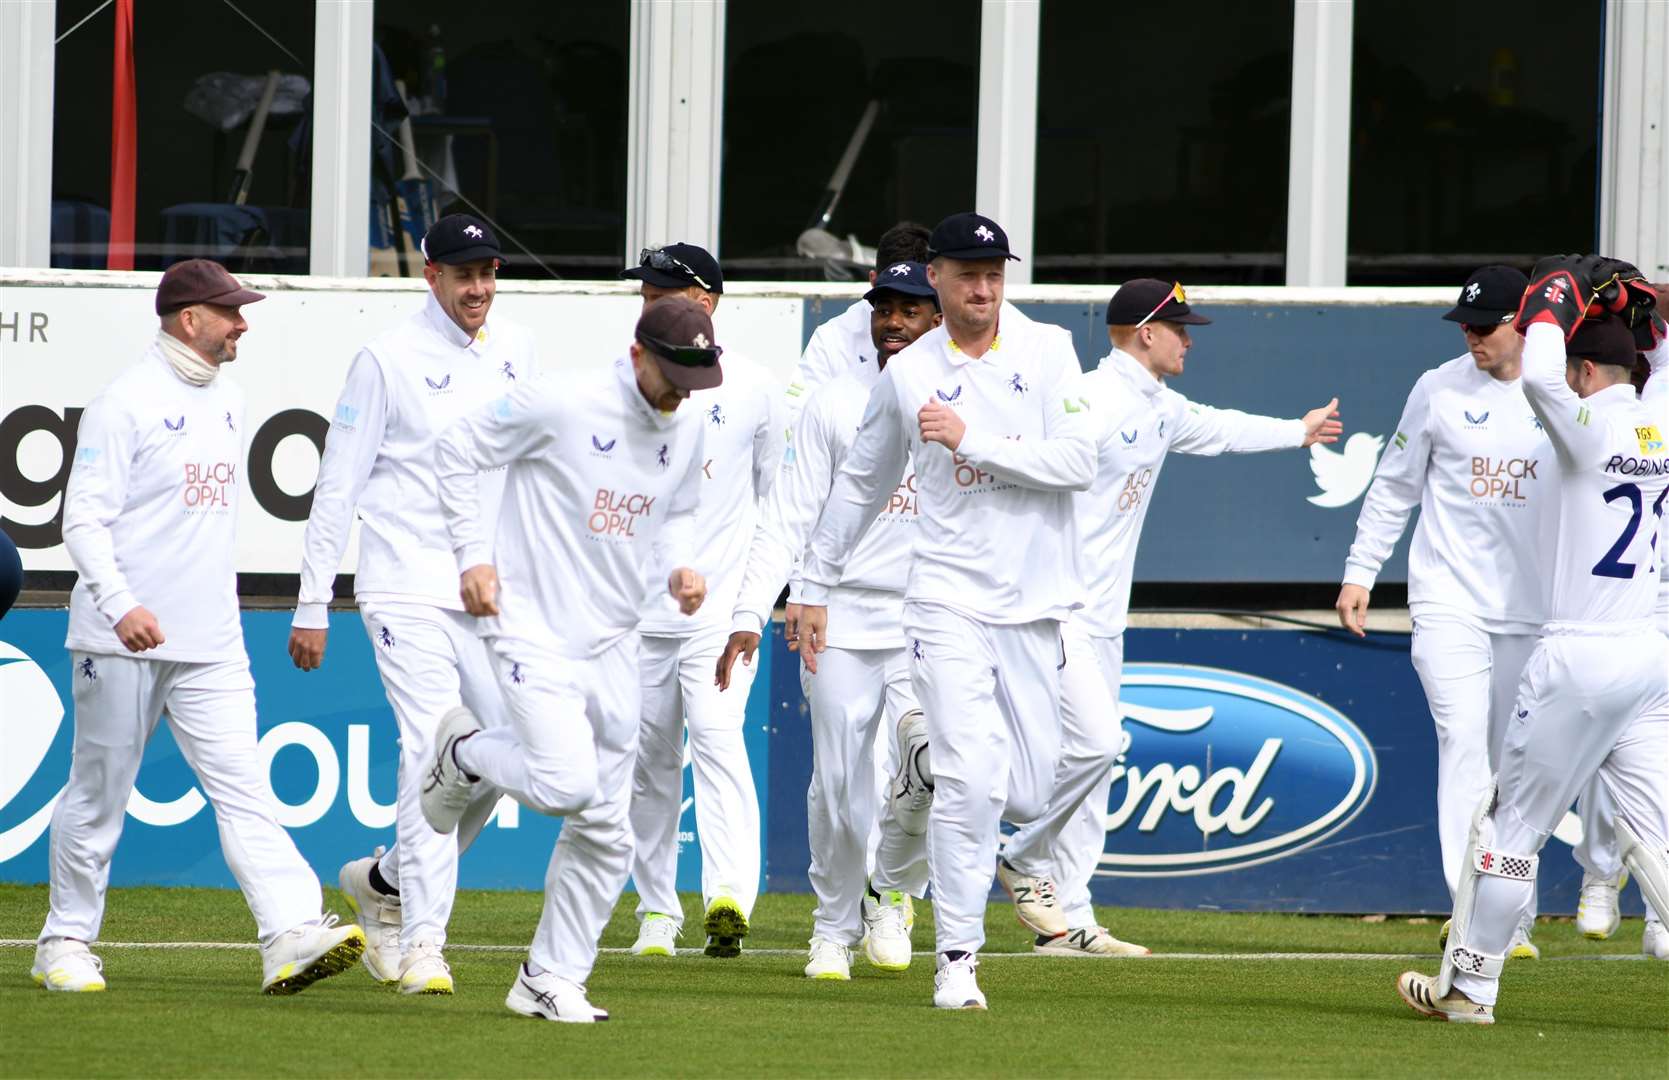 The Kent side take to the field on the opening day of the season. Picture: Barry Goodwin (55957398)